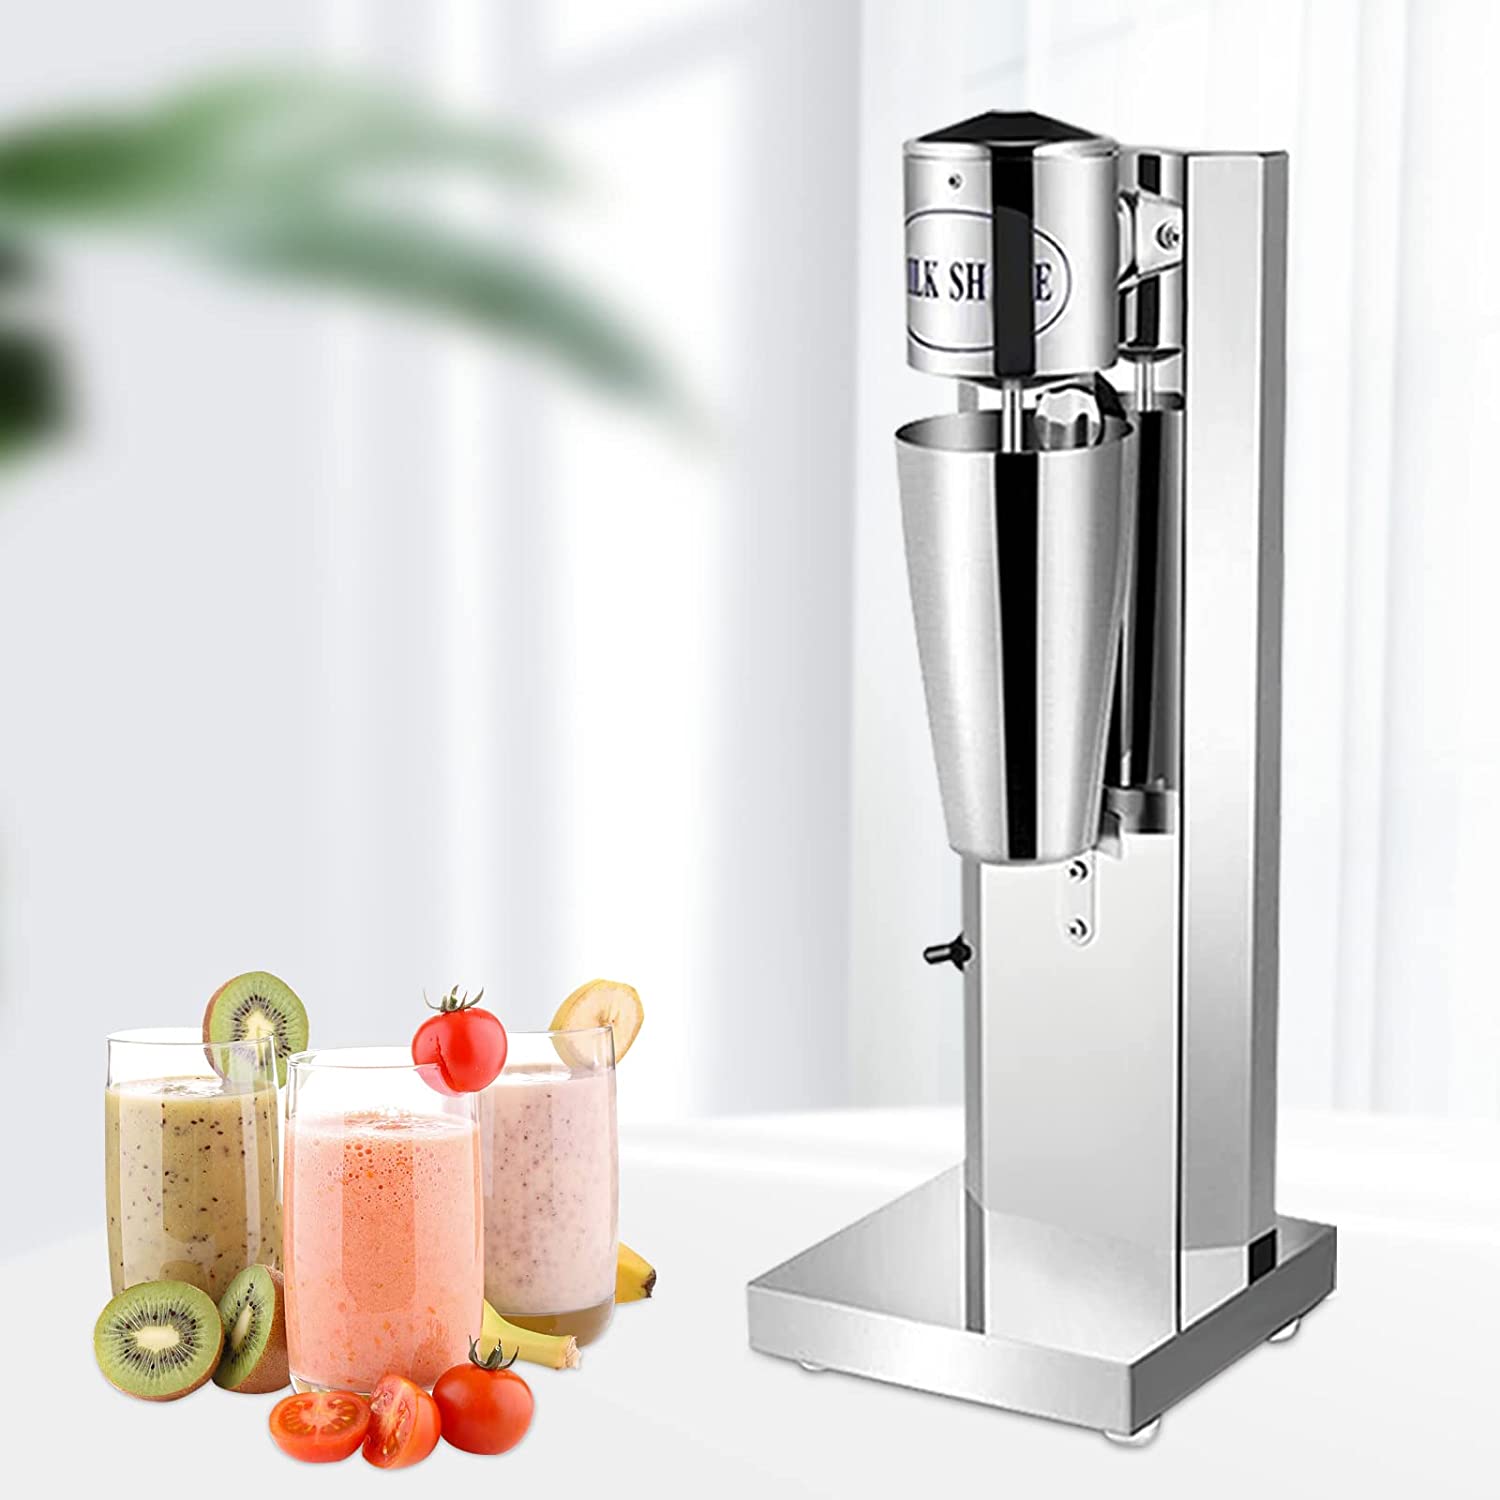 Denest Milk Shaking Machine Electric Milk Shaker Single Head Mixer Stainless Steel with 2 Cups, Silver